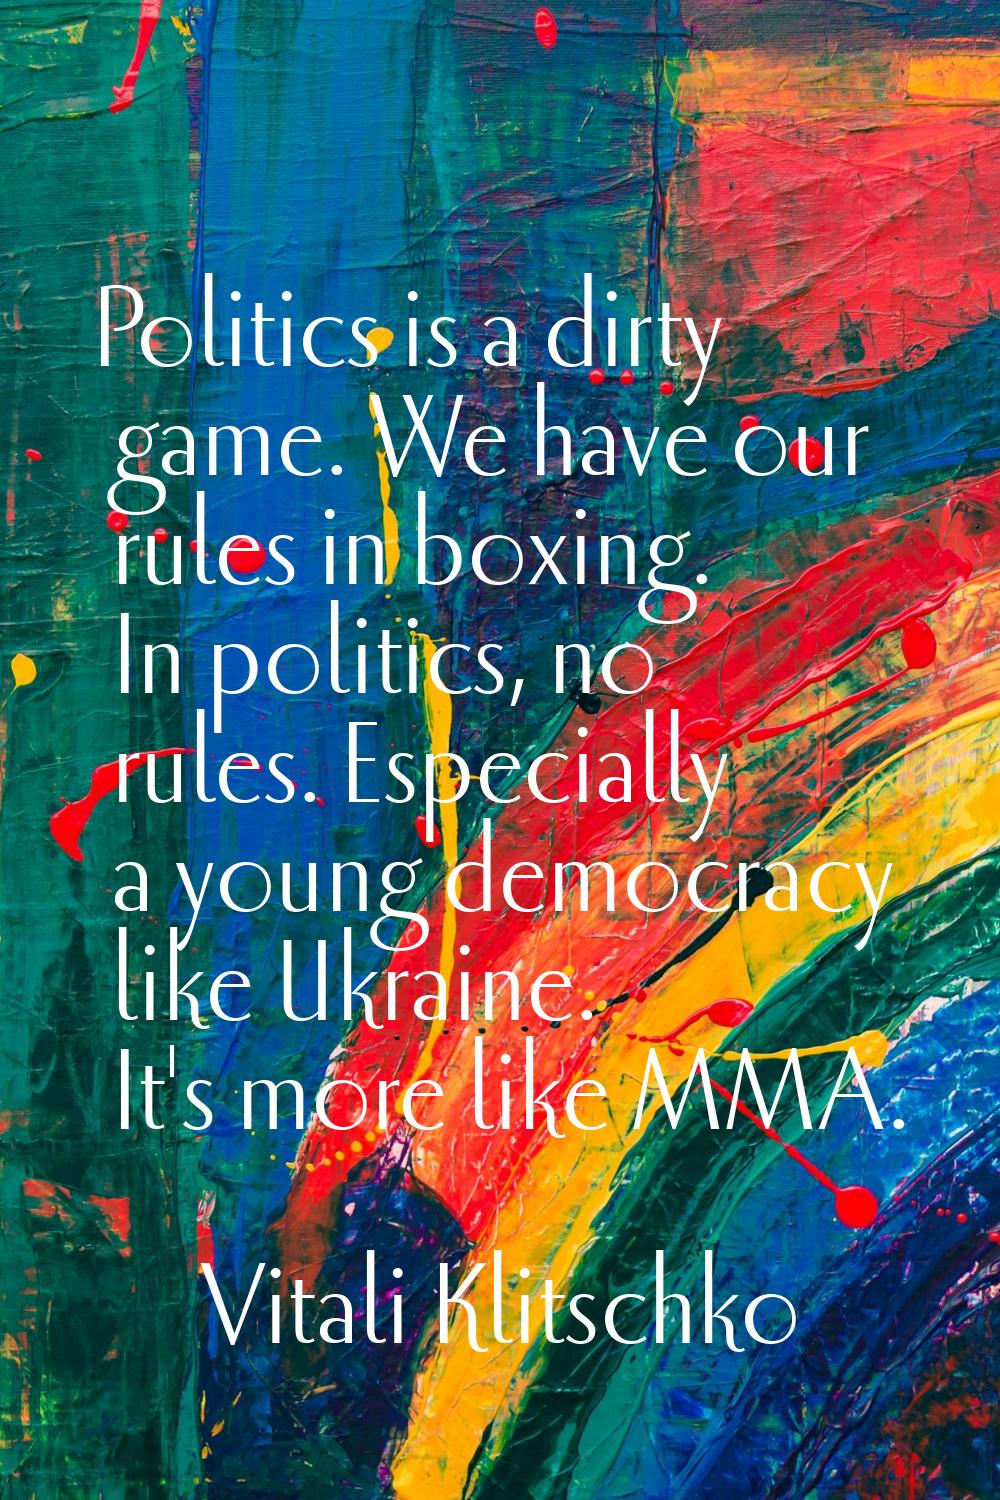 Politics is a dirty game. We have our rules in boxing. In politics, no rules. Especially a young de